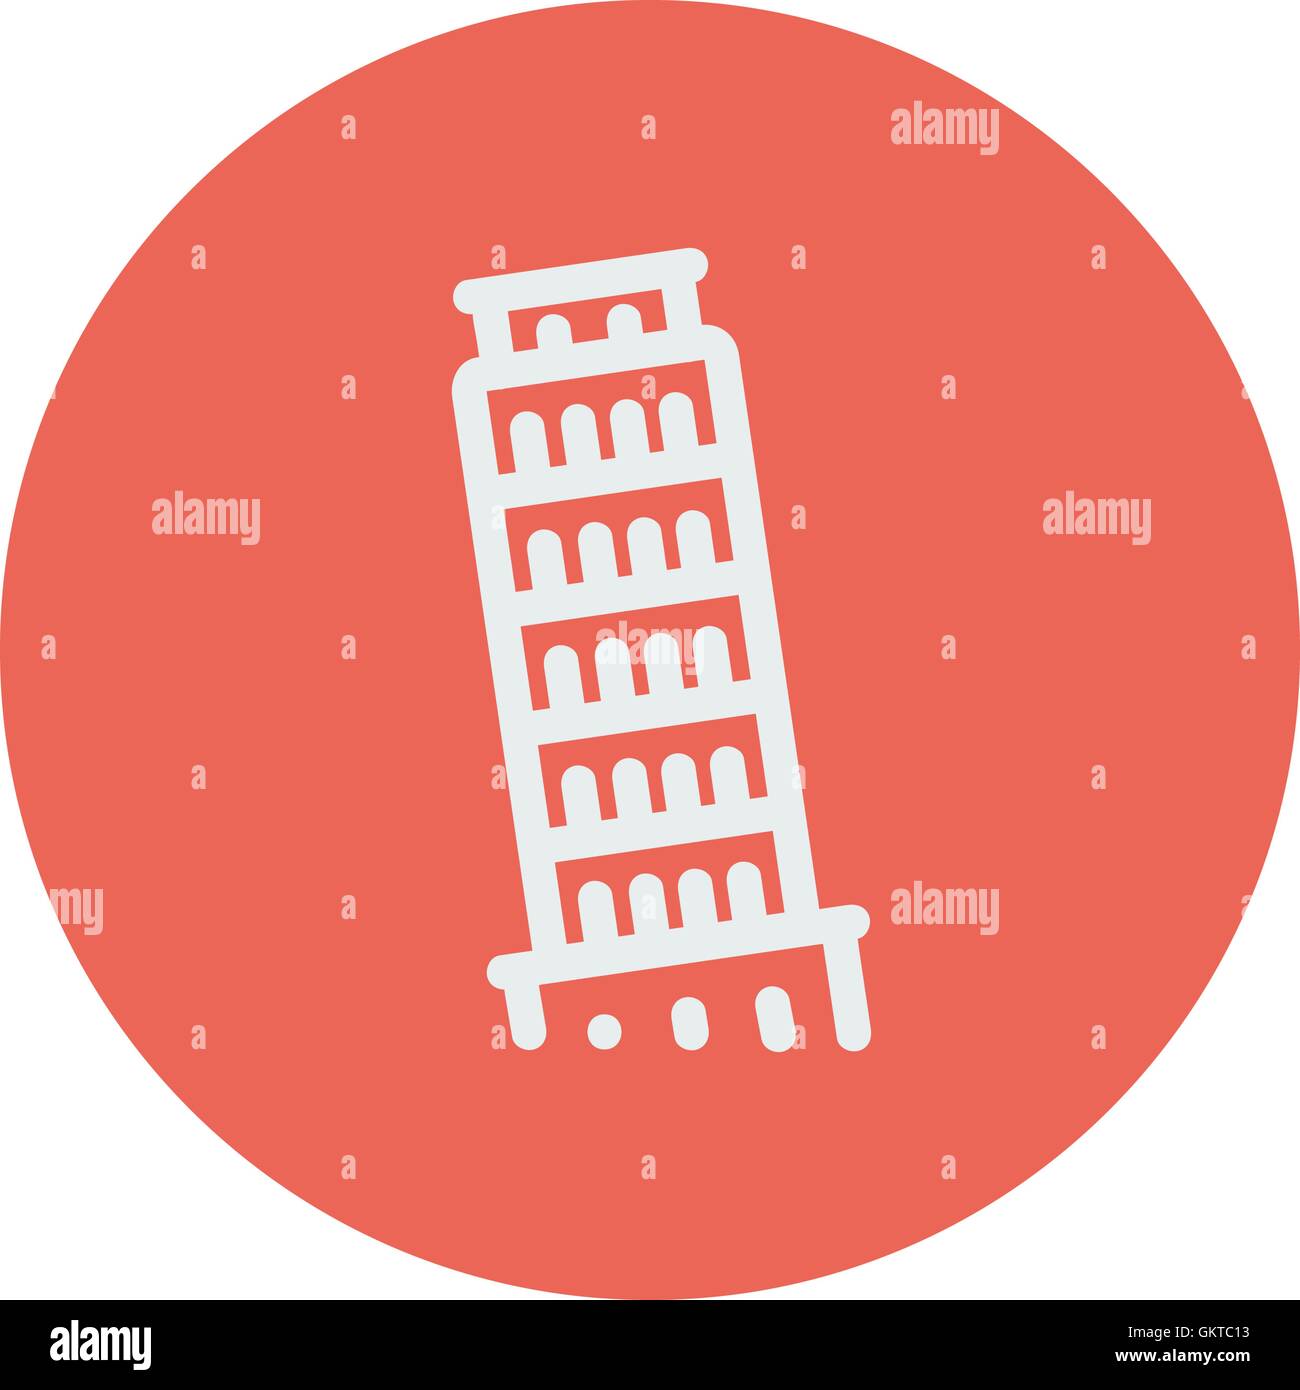 The leaning tower of pisa thin line icon Stock Vector